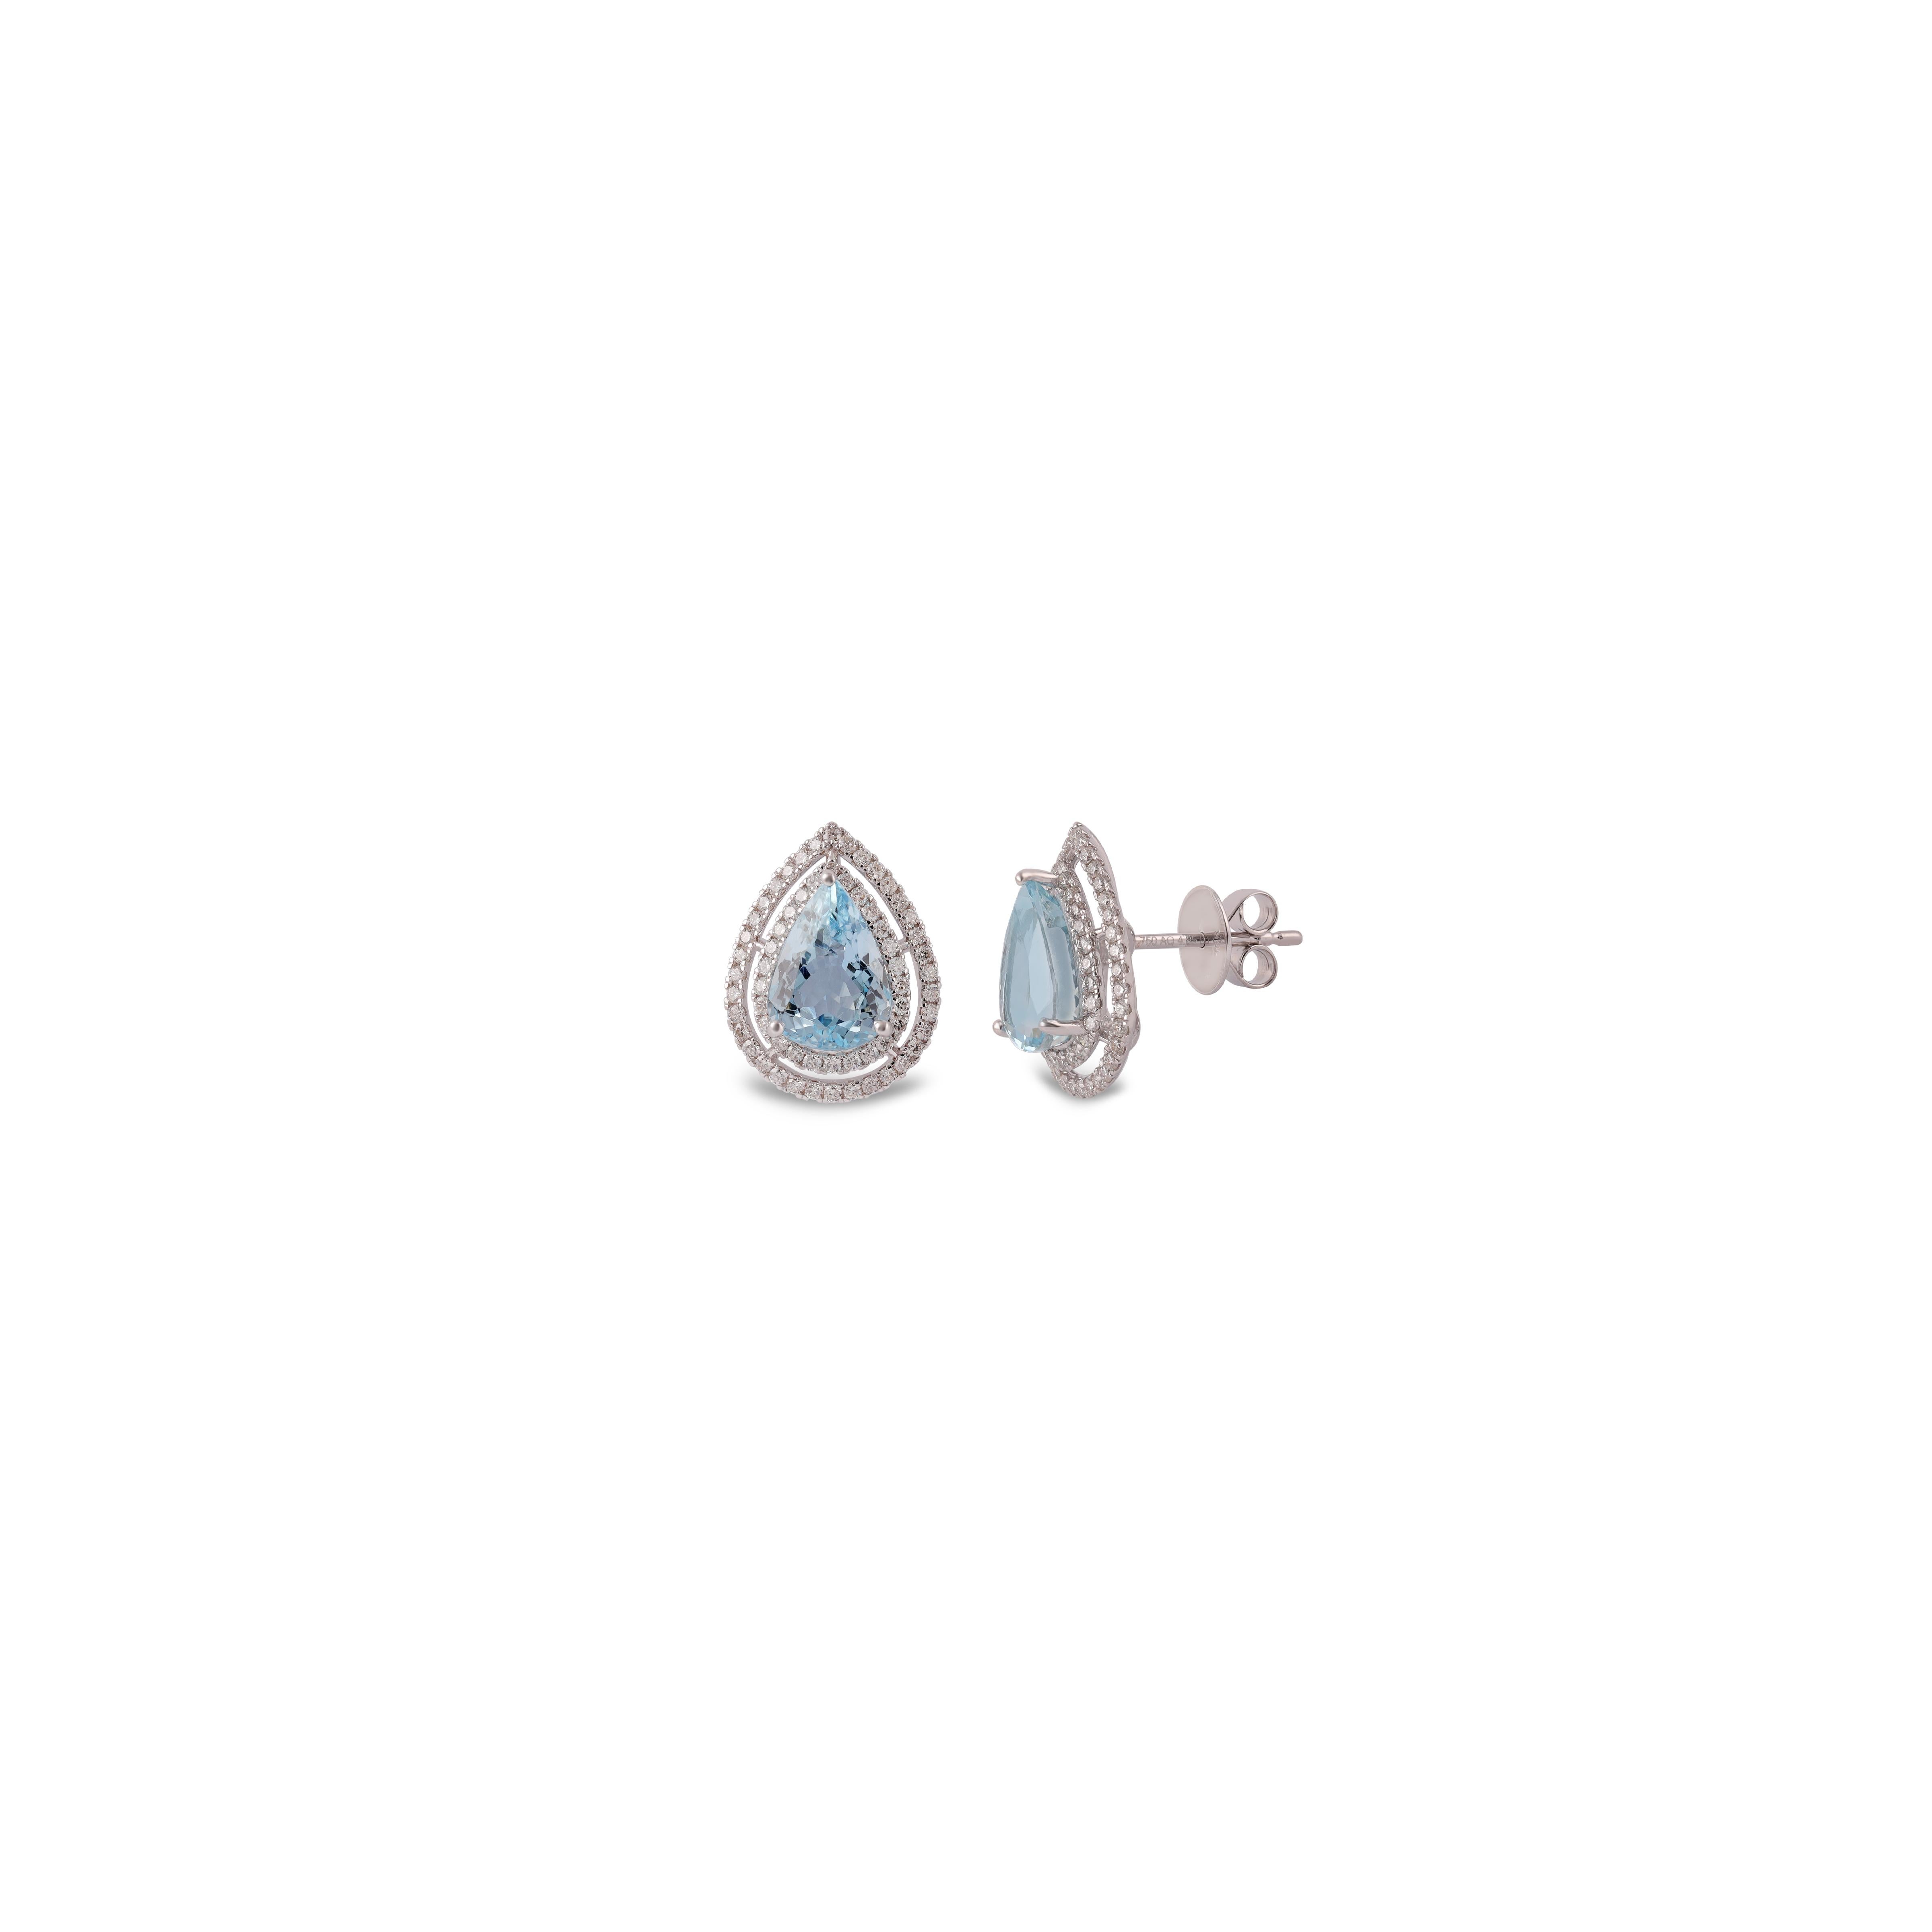 Pear Cut 4.85 Carat Clear Aquamarine & Diamond Cluster Earring Stud in 18K White gold For Sale